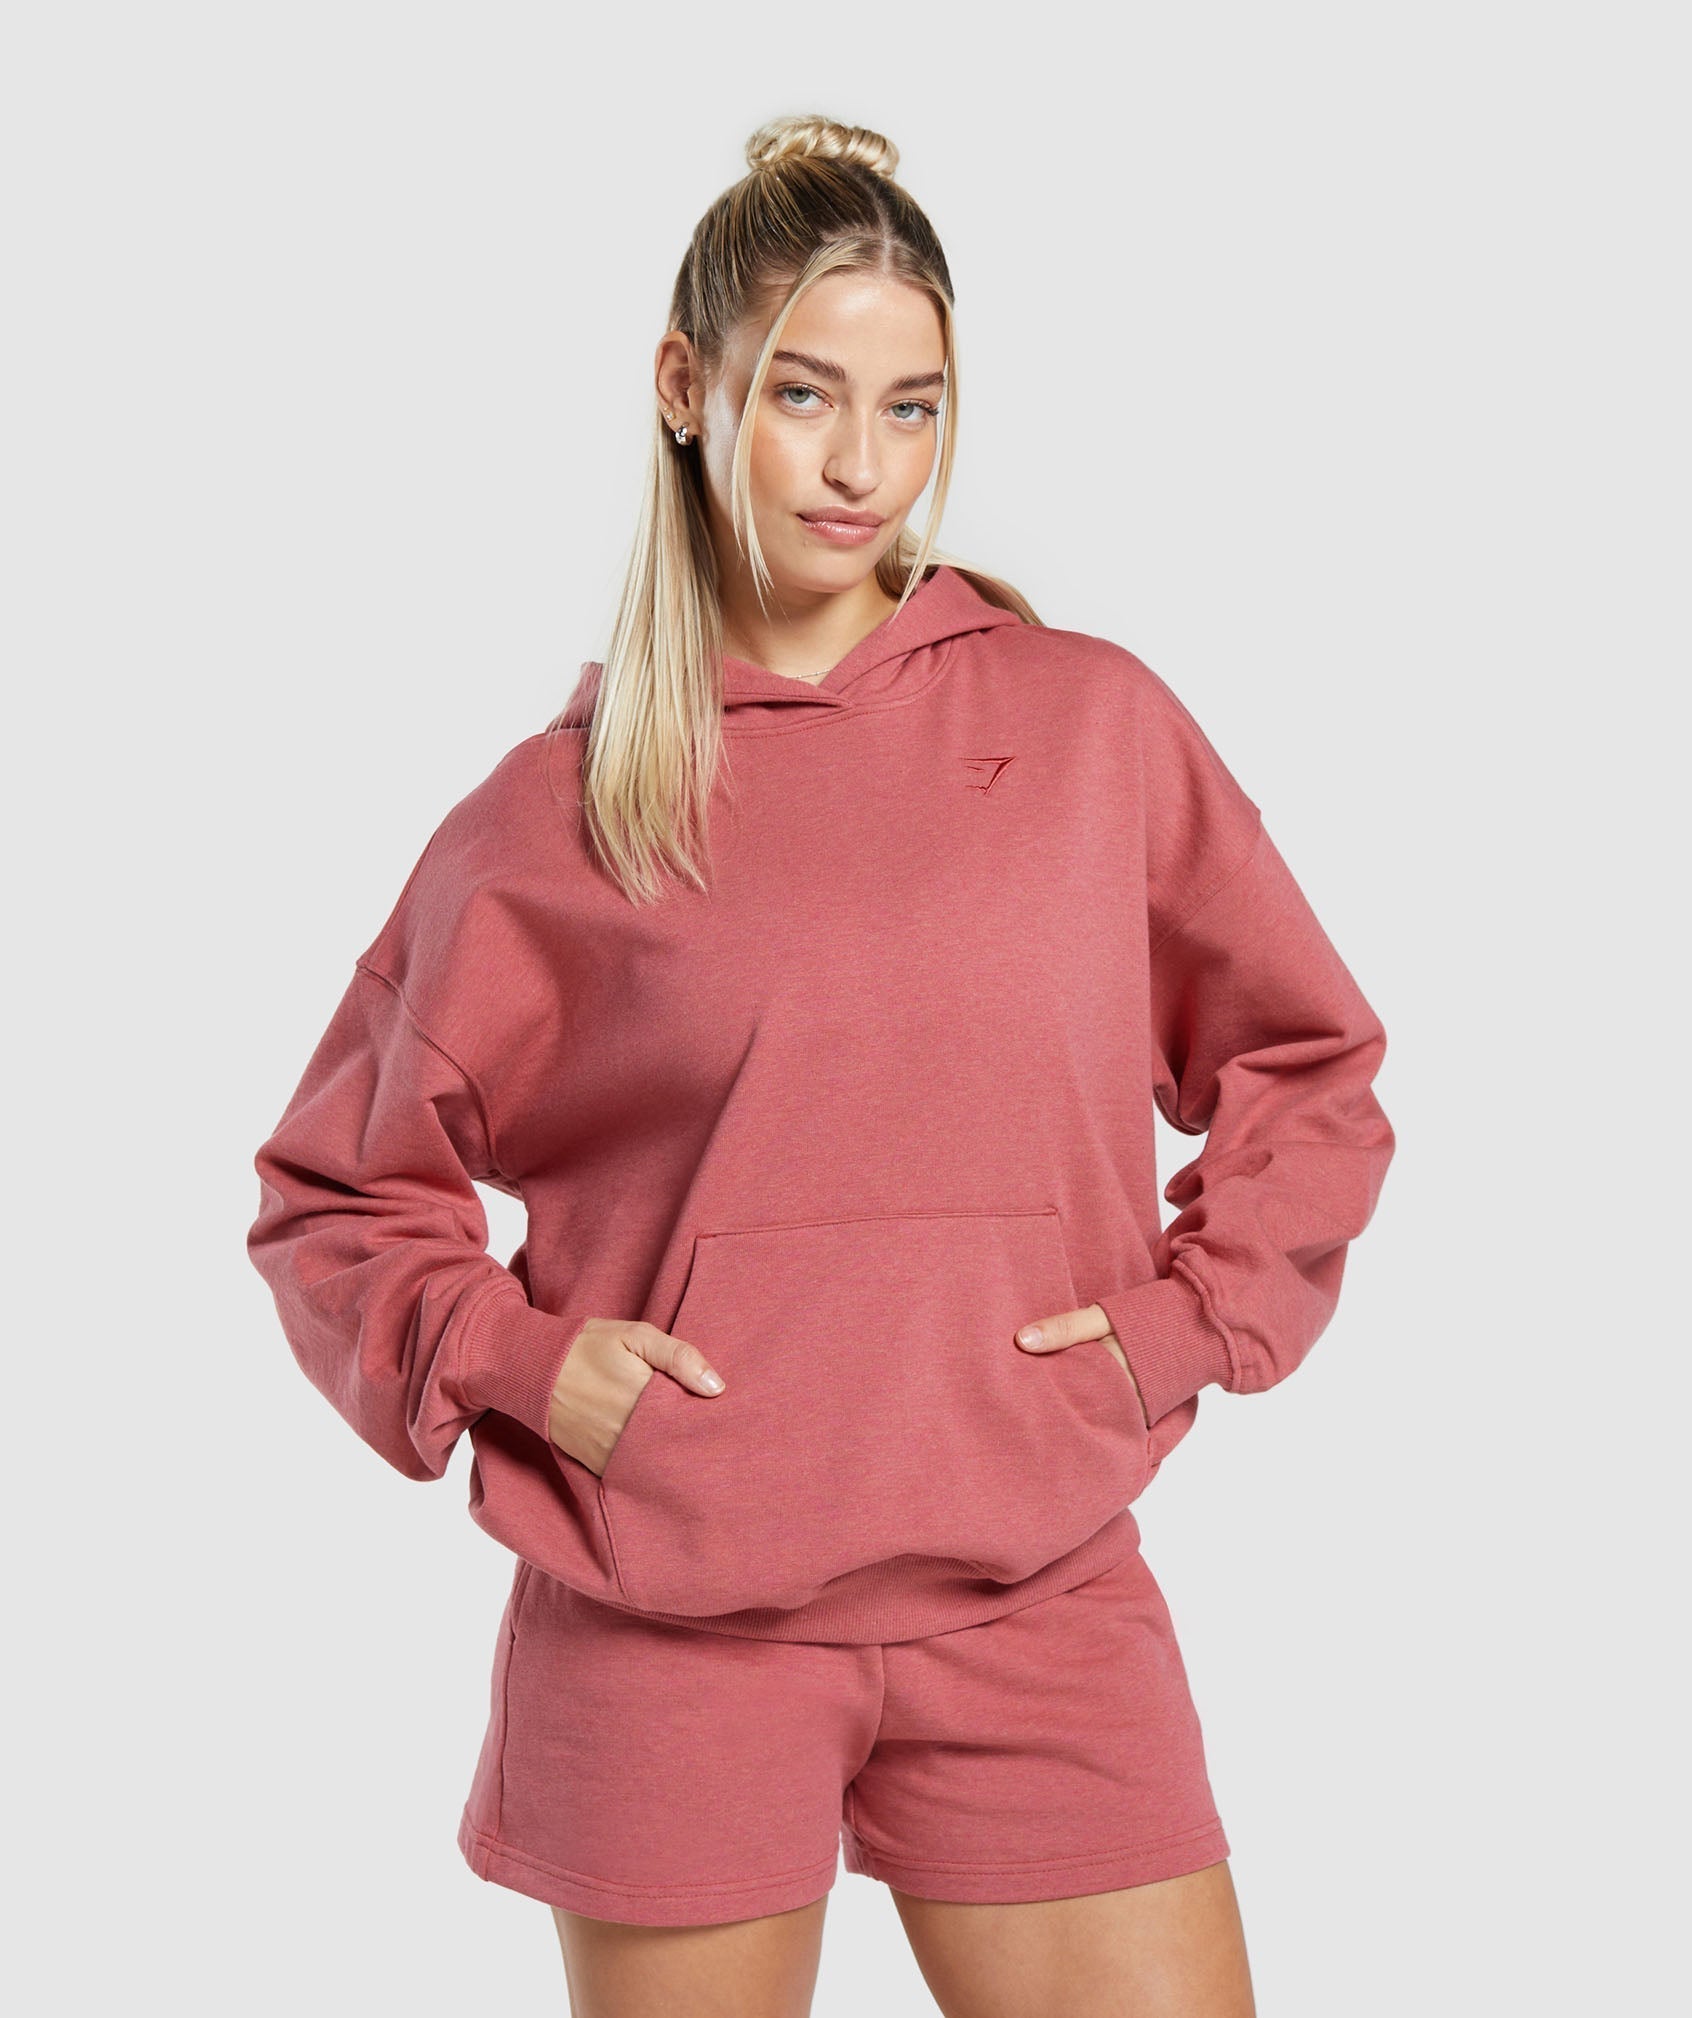 Rest Day Sweats Hoodie in Heritage Pink Marl - view 1